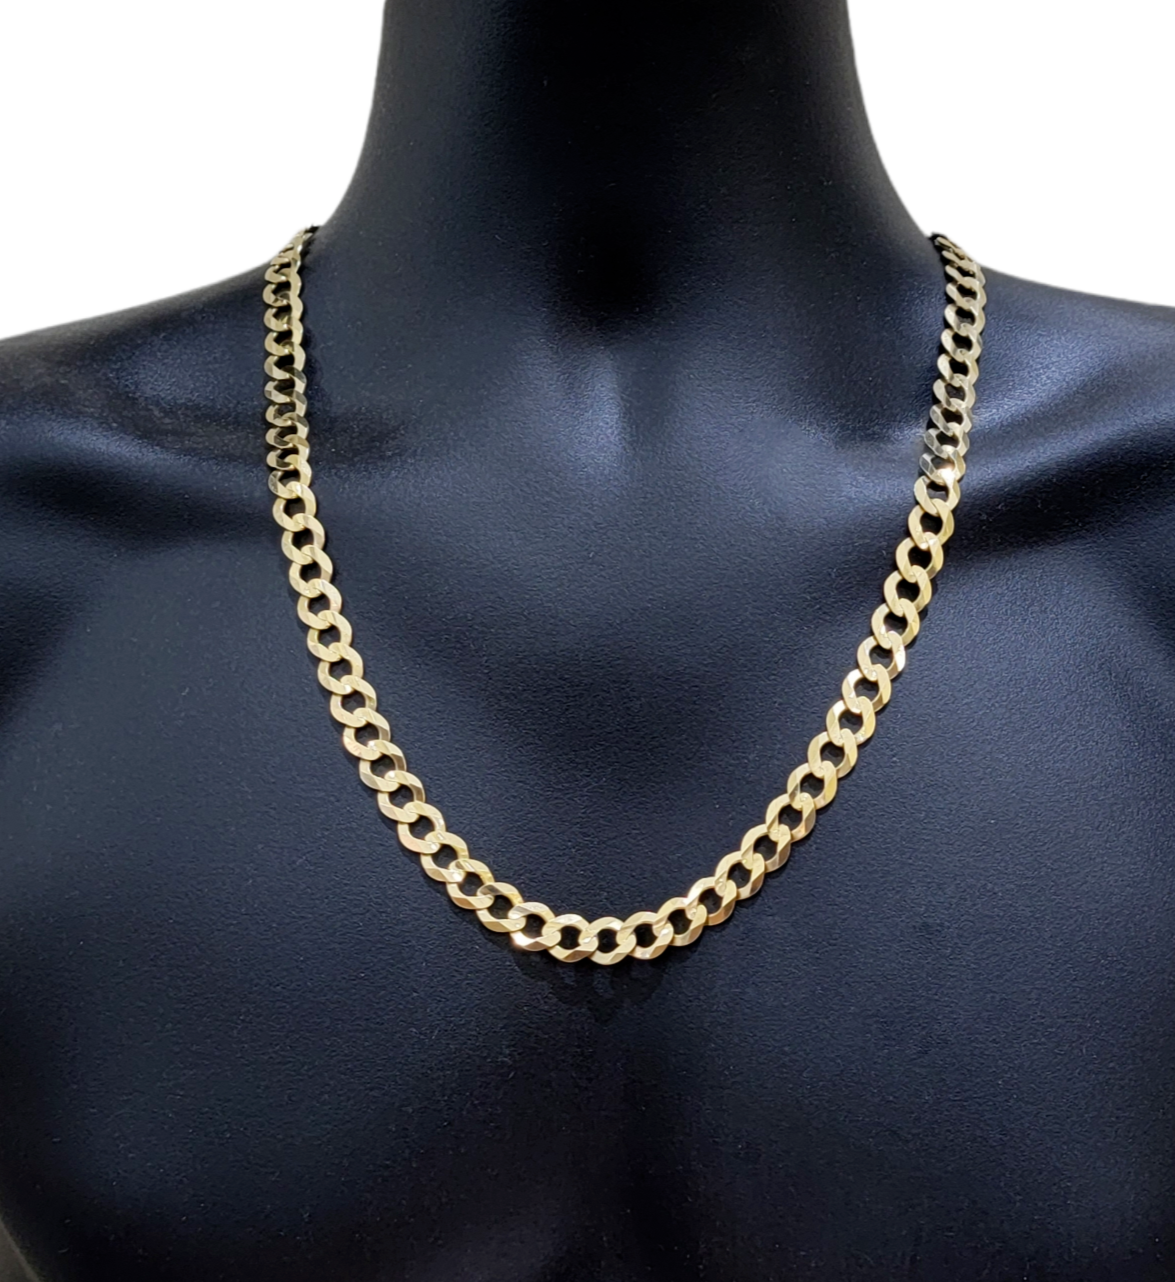 Real 10k Gold Chain Cuban Curb Link 18 Inch 10mm Solid 10kt Yellow Gold Necklace